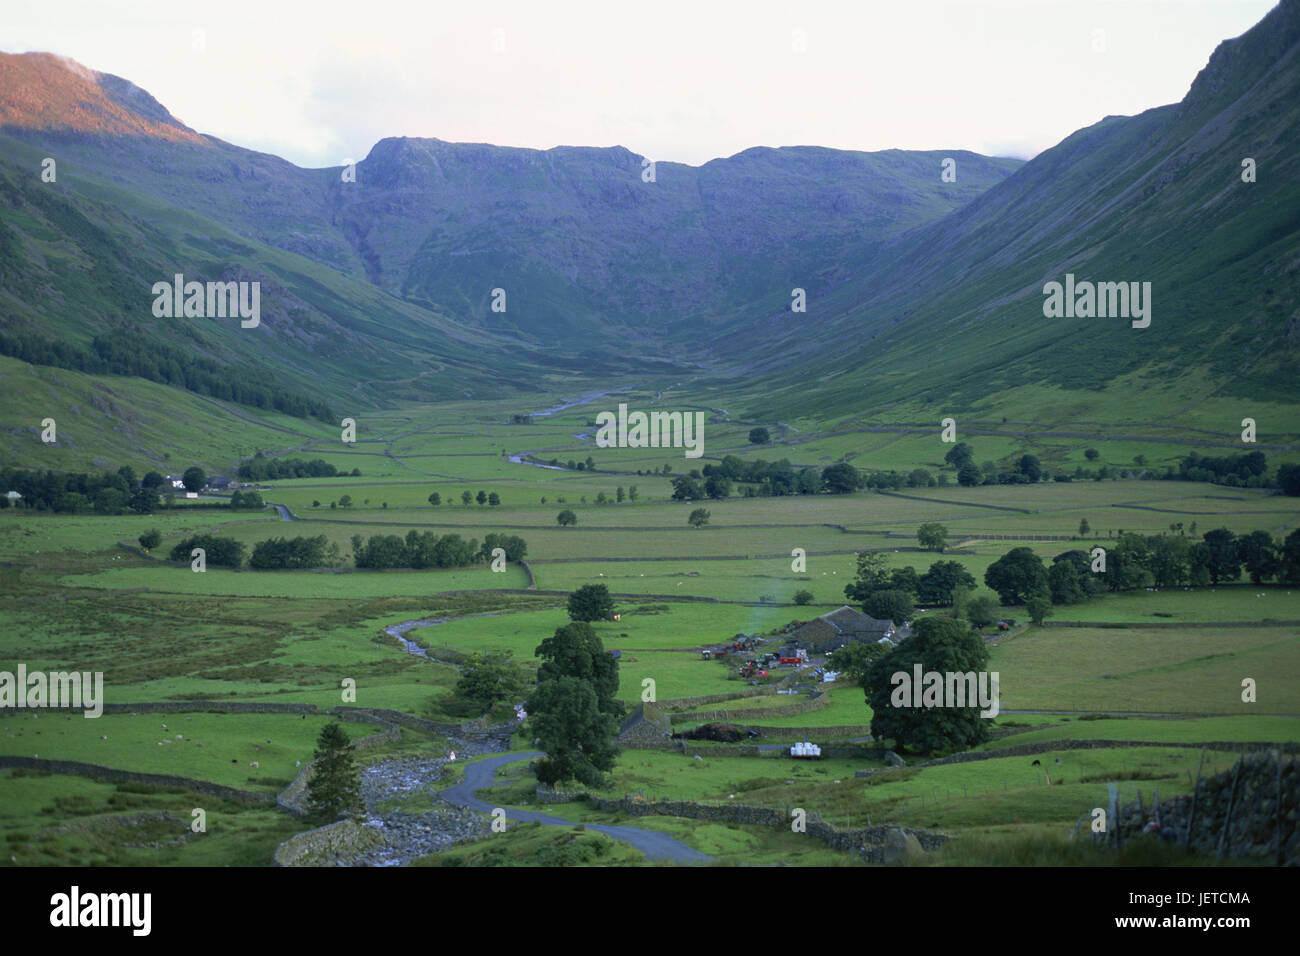 Great Britain, England, Cumbria, brine District, Great Langdale, mountain landscape, Cumbrian Mountains, Europe, width, distance, mountains, hills, meadows, green, houses, farms, isolates, brook, trees, view, rurally, remotely, Stock Photo